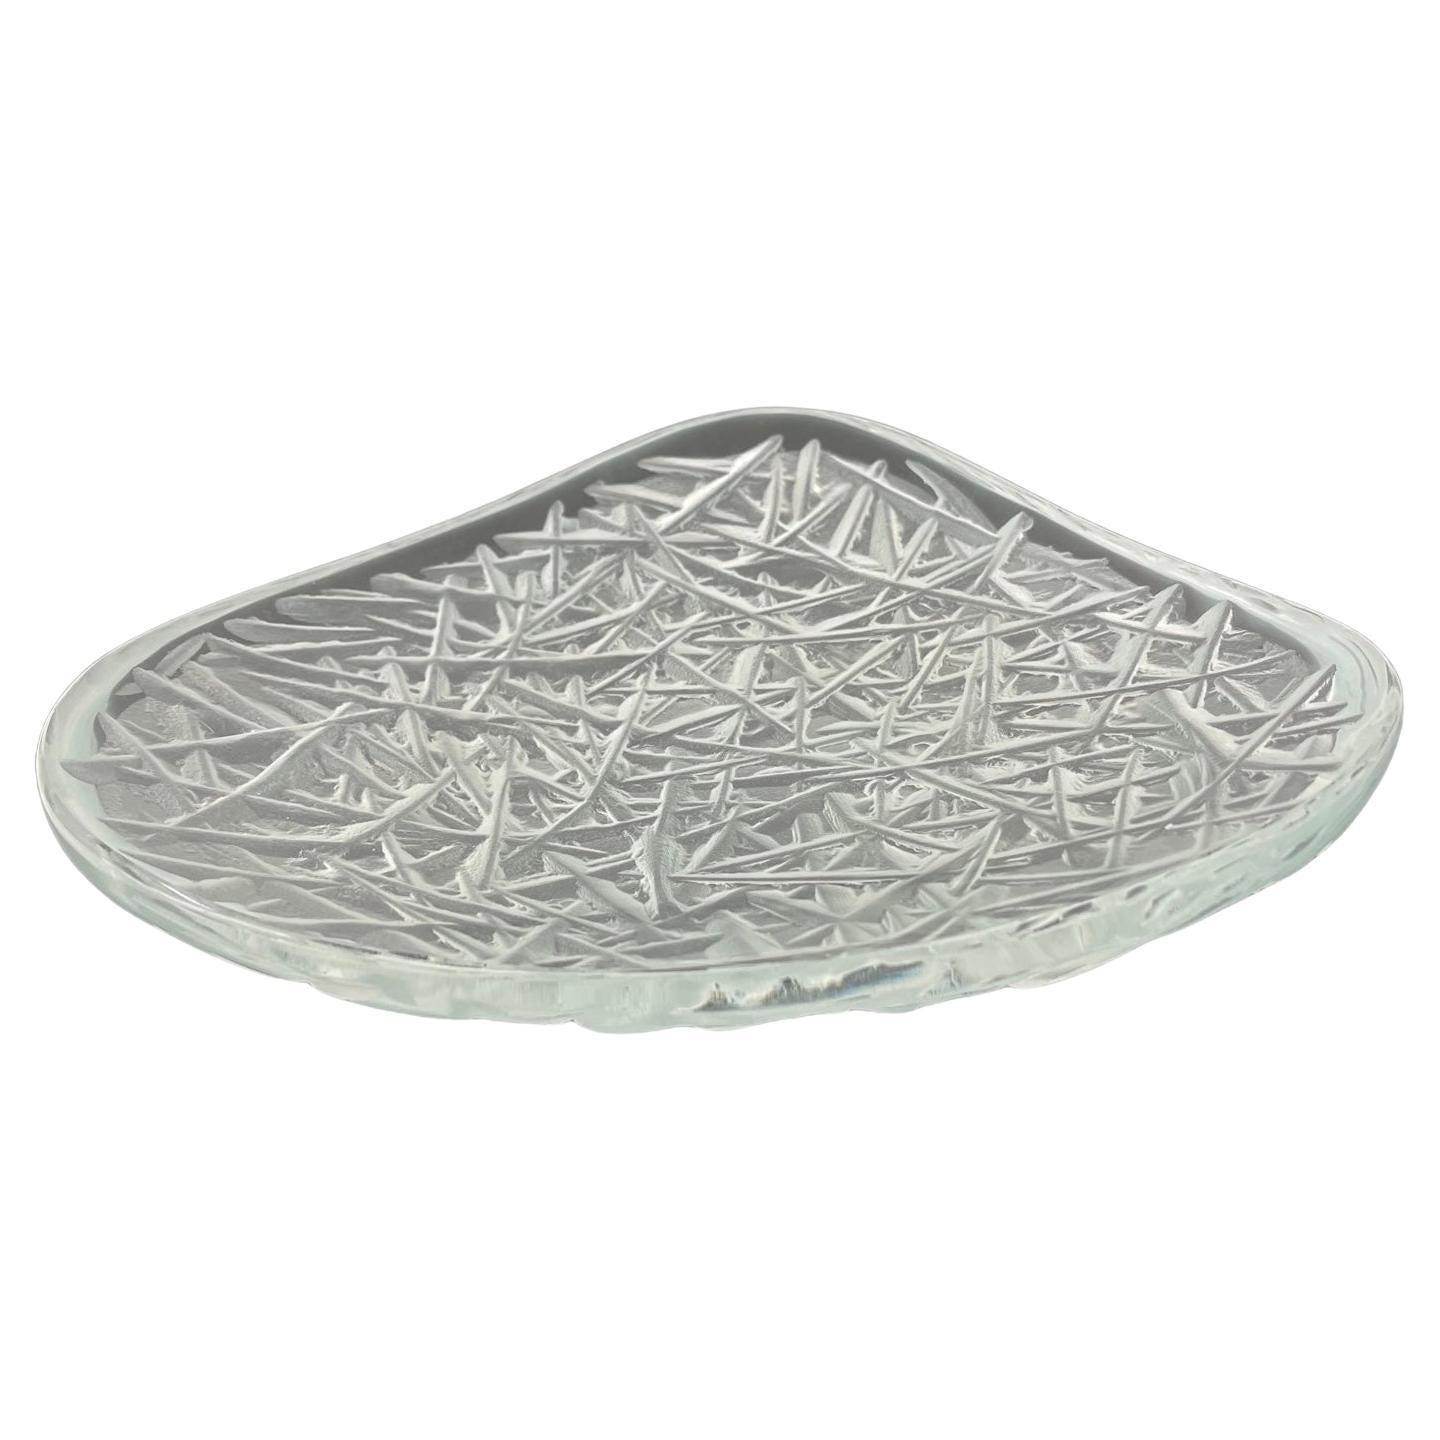 Unique Contemporary Hand-engraved Crystal Bowl by Ghiró Studio For Sale